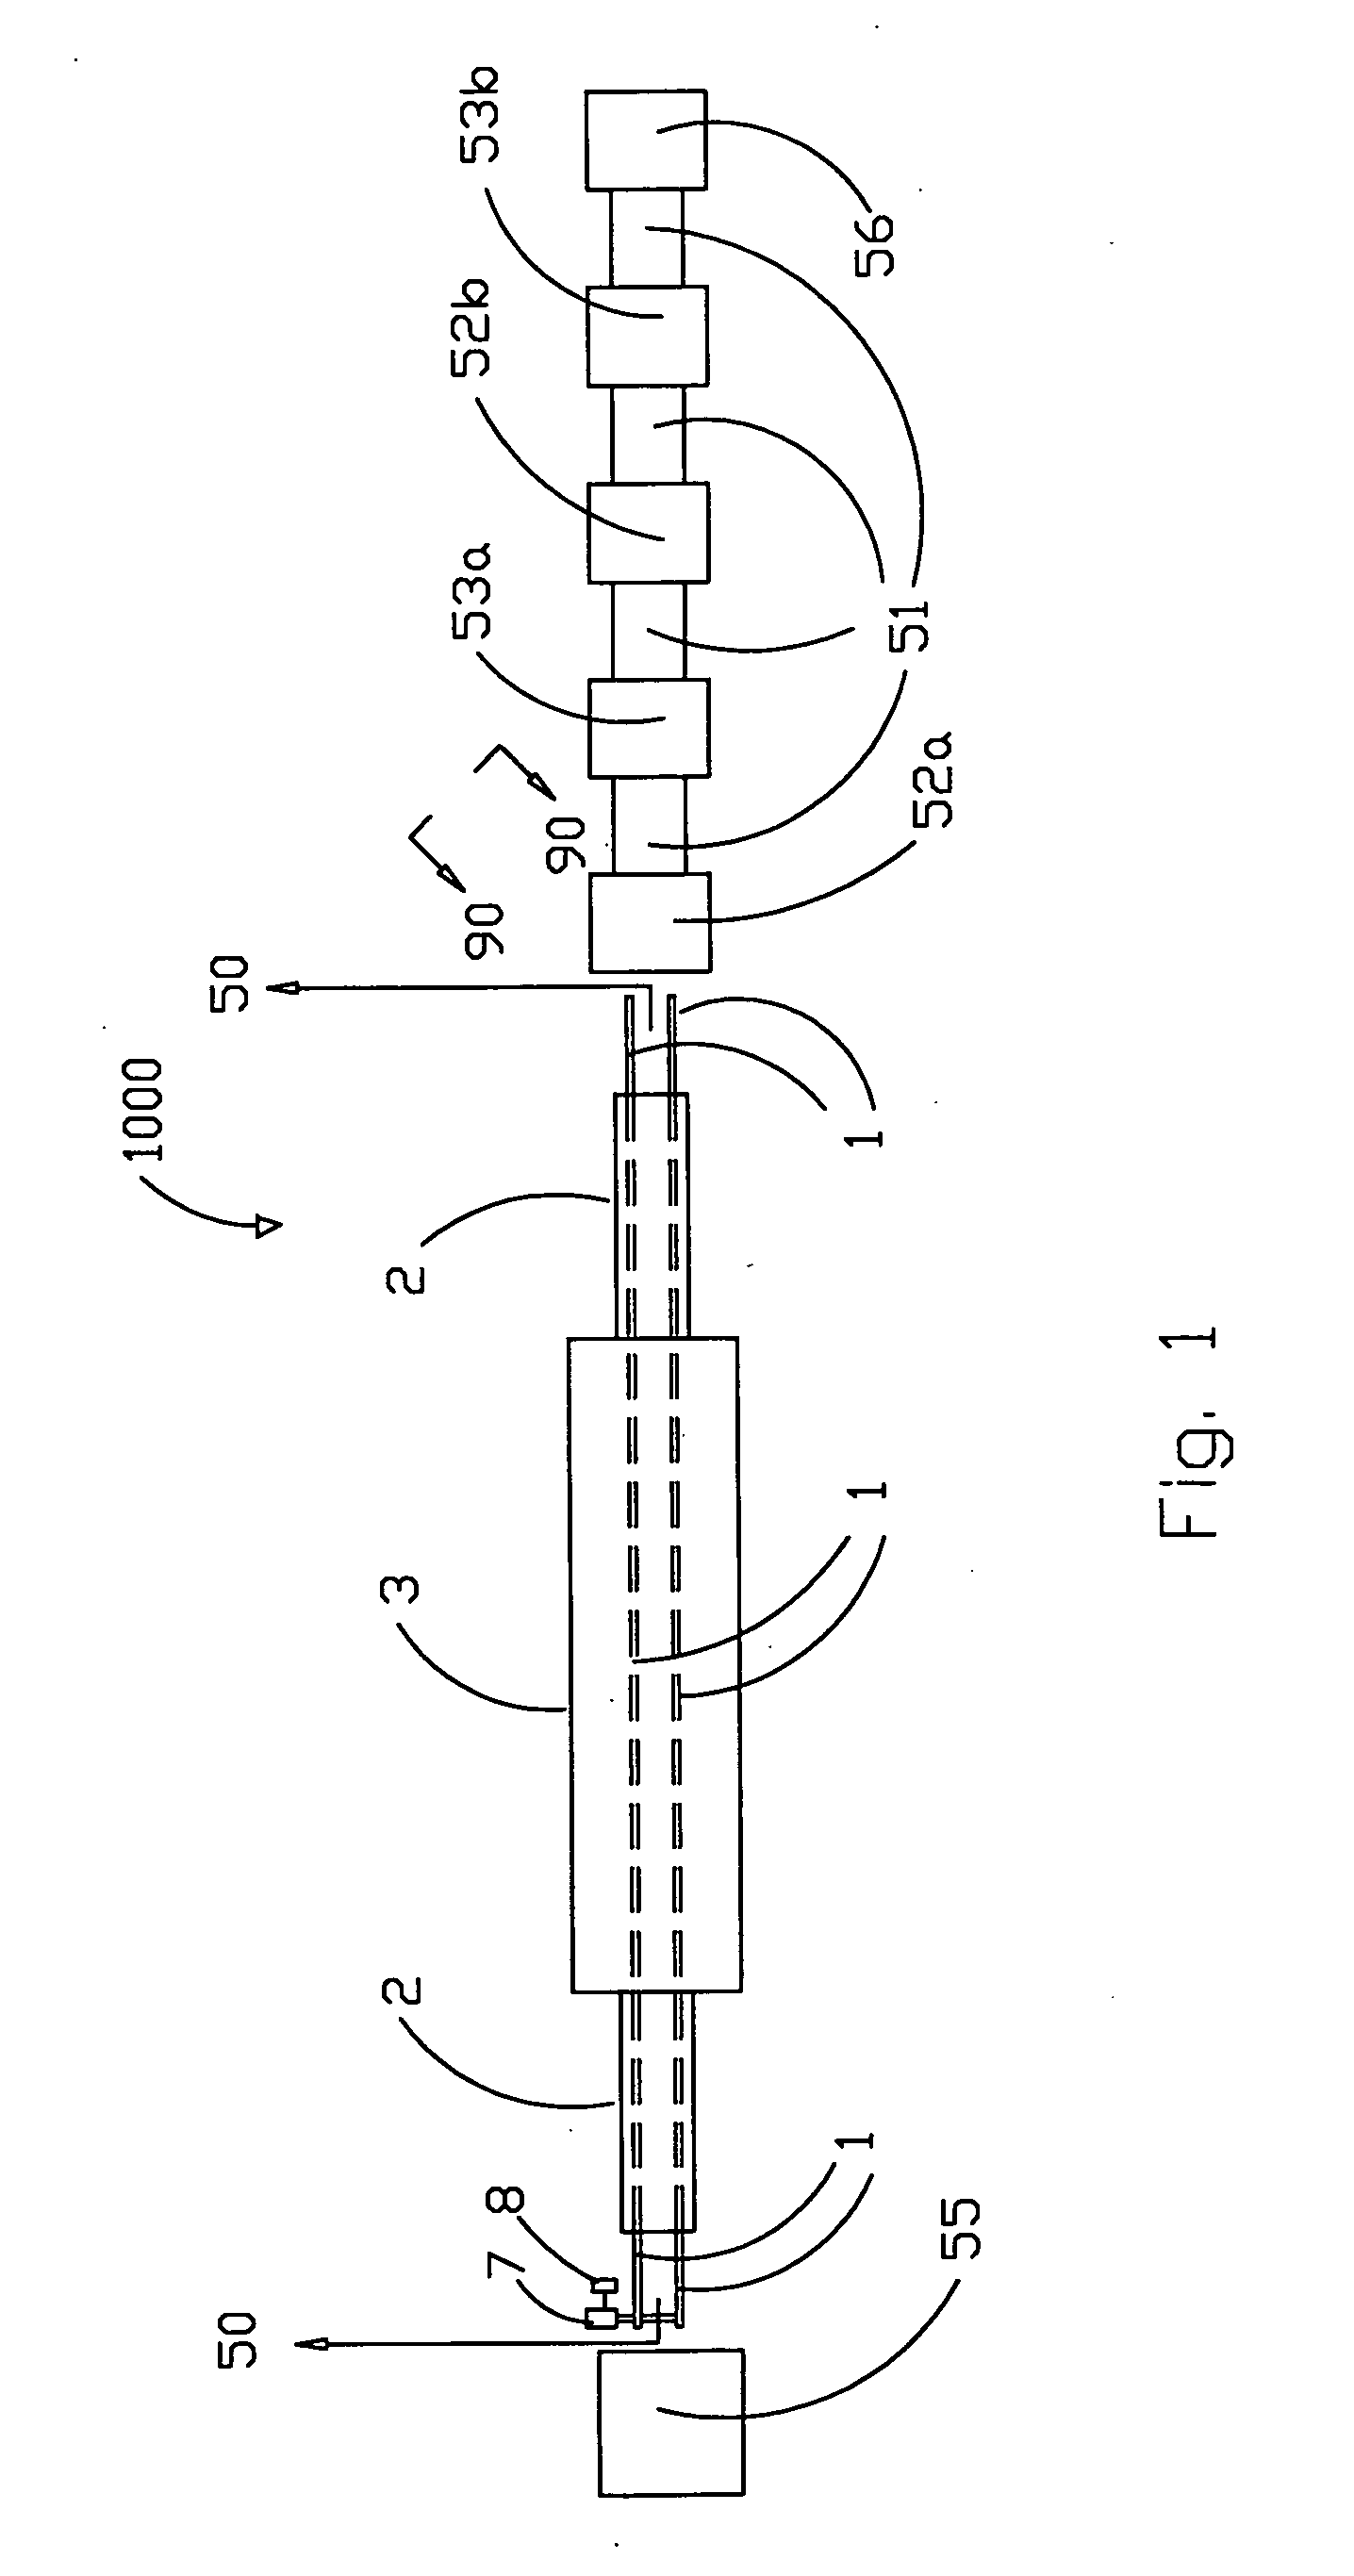 Apparatus and processes for the mass production of photovoltaic modules